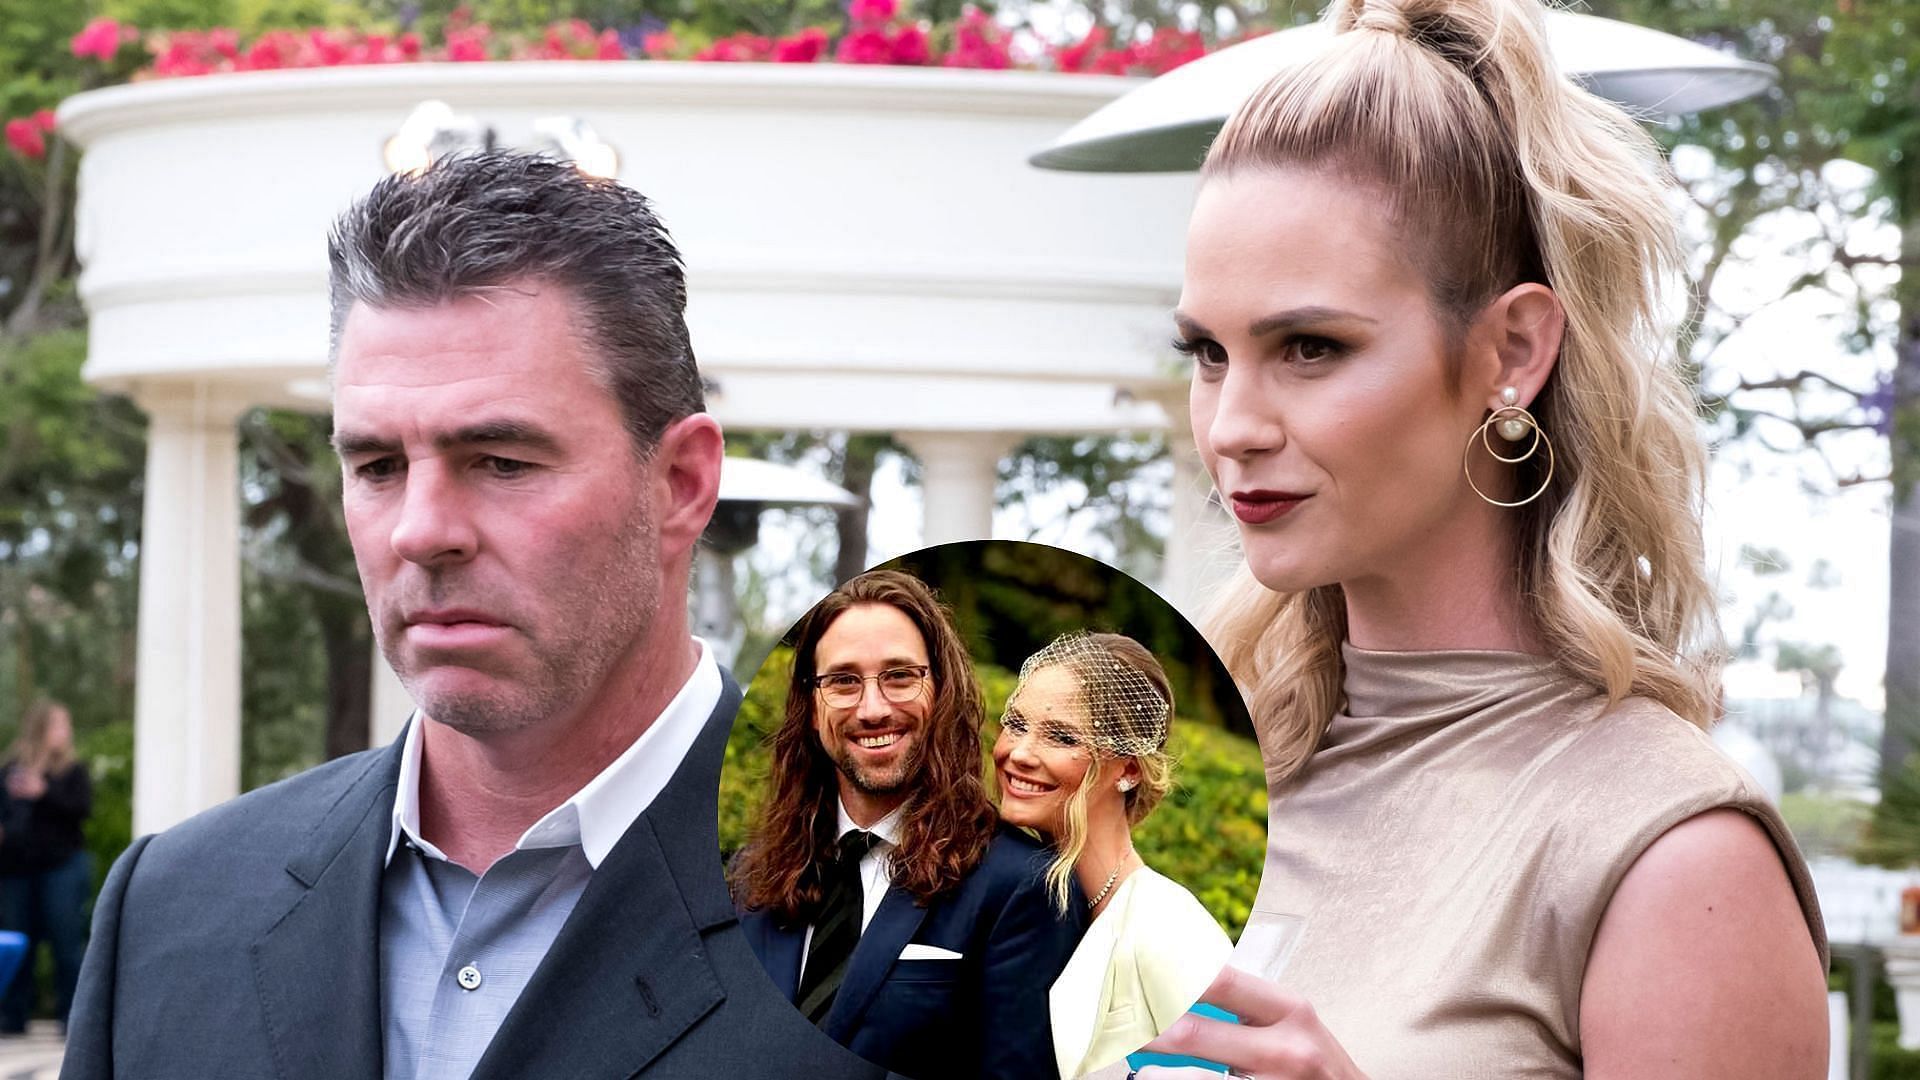 Jim Edmonds with his ex-wife, Meghan King; Meghan King with Cuffe Biden Owens (inset).